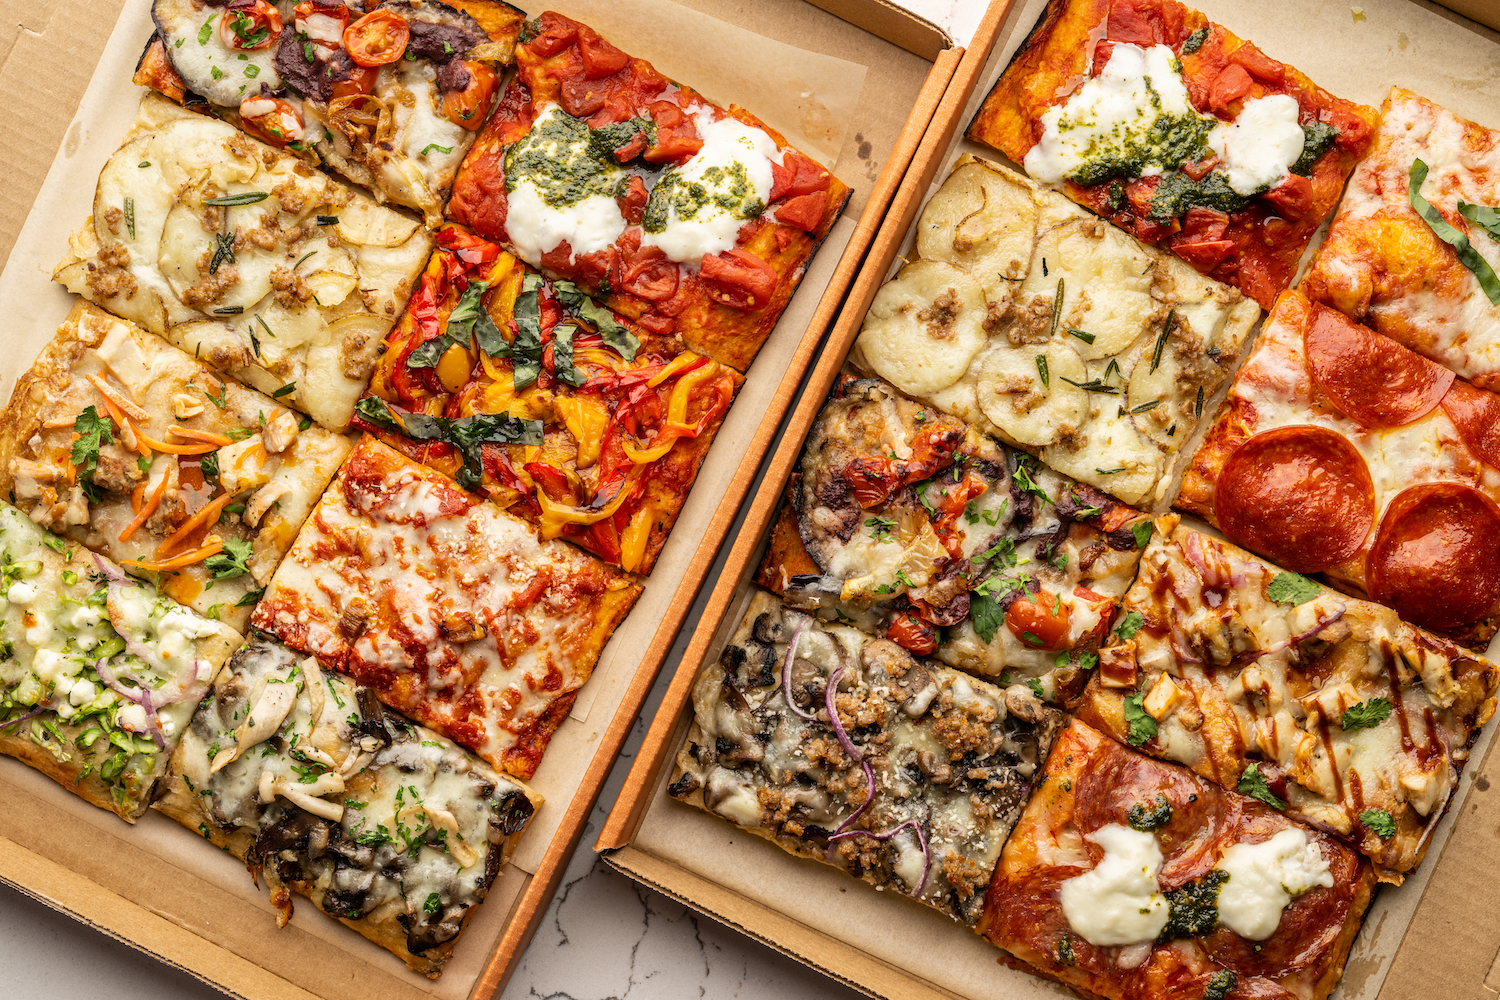 slices of rectangular-sliced pizza with a variety of different toppings